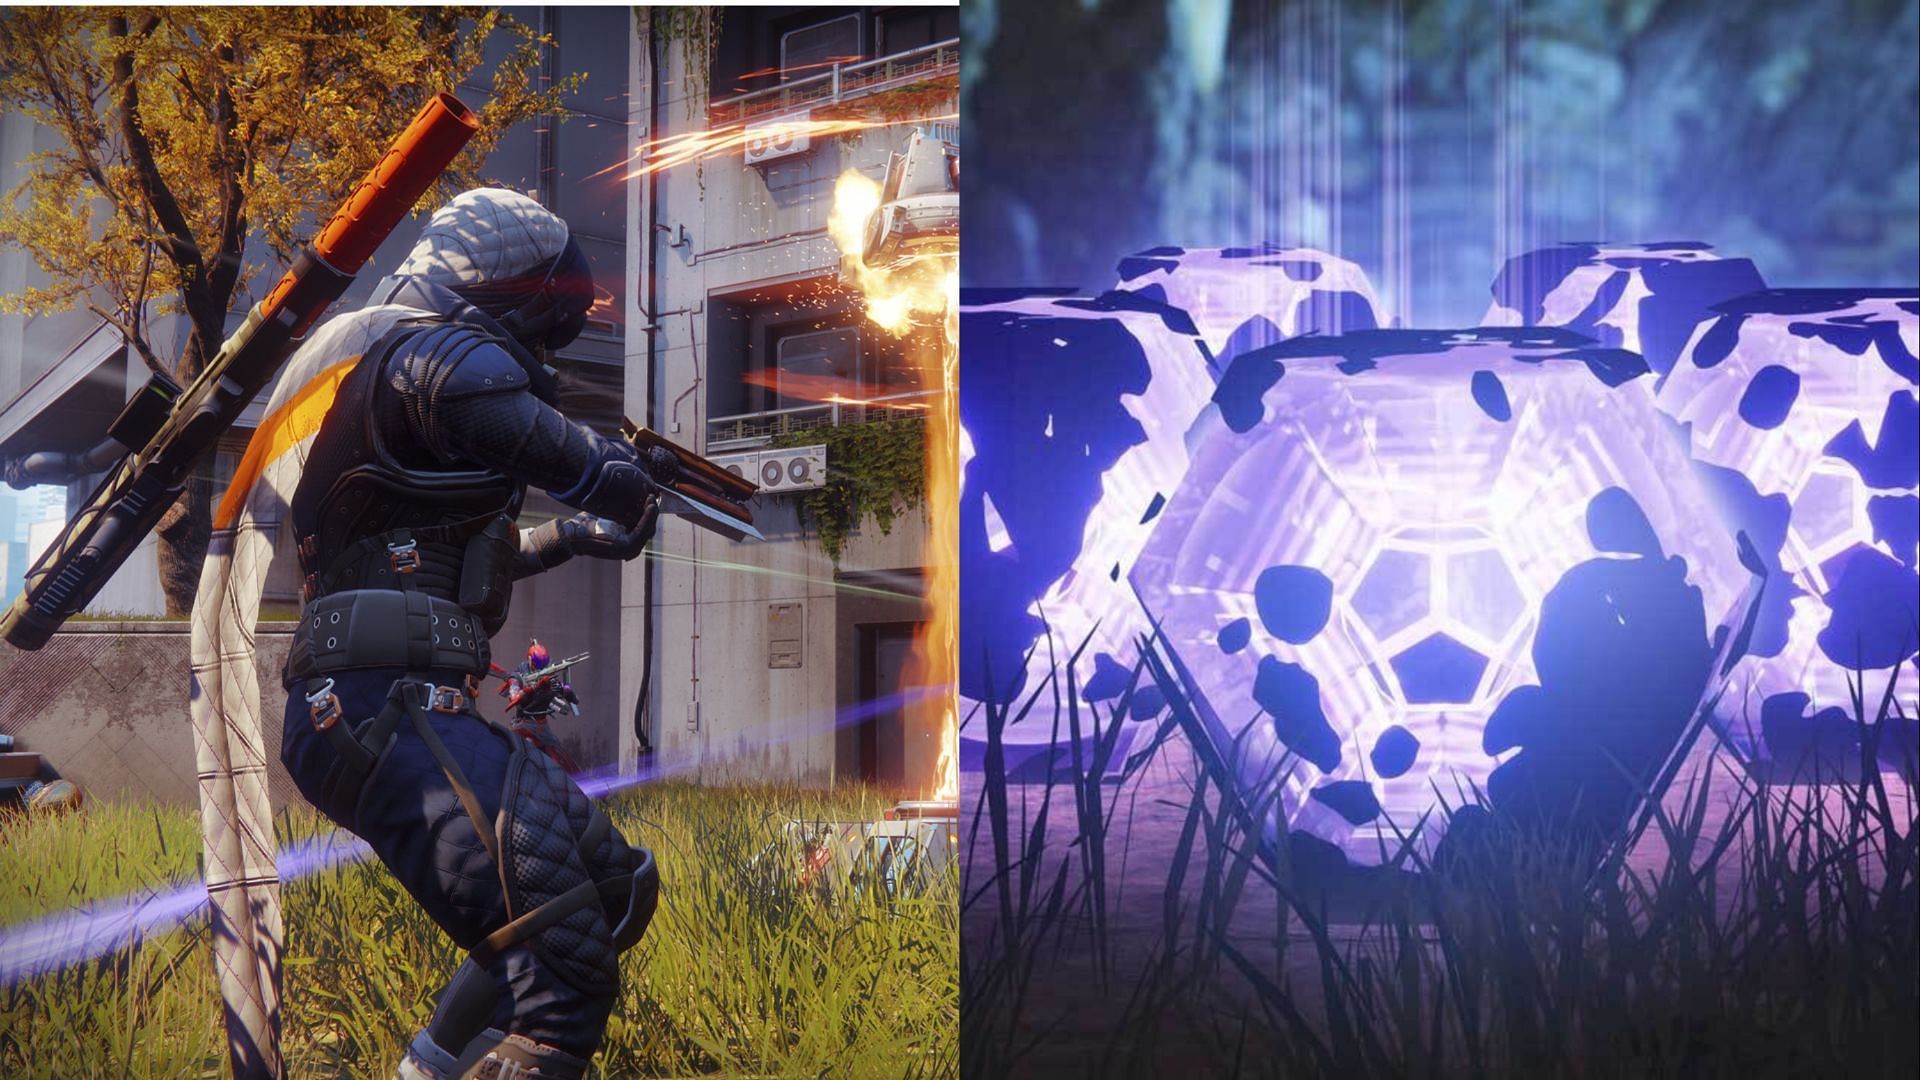 Opening engrams at the correct moment in Destiny 2 Lightfall allows players to maximize their score better (Images via Bungie)